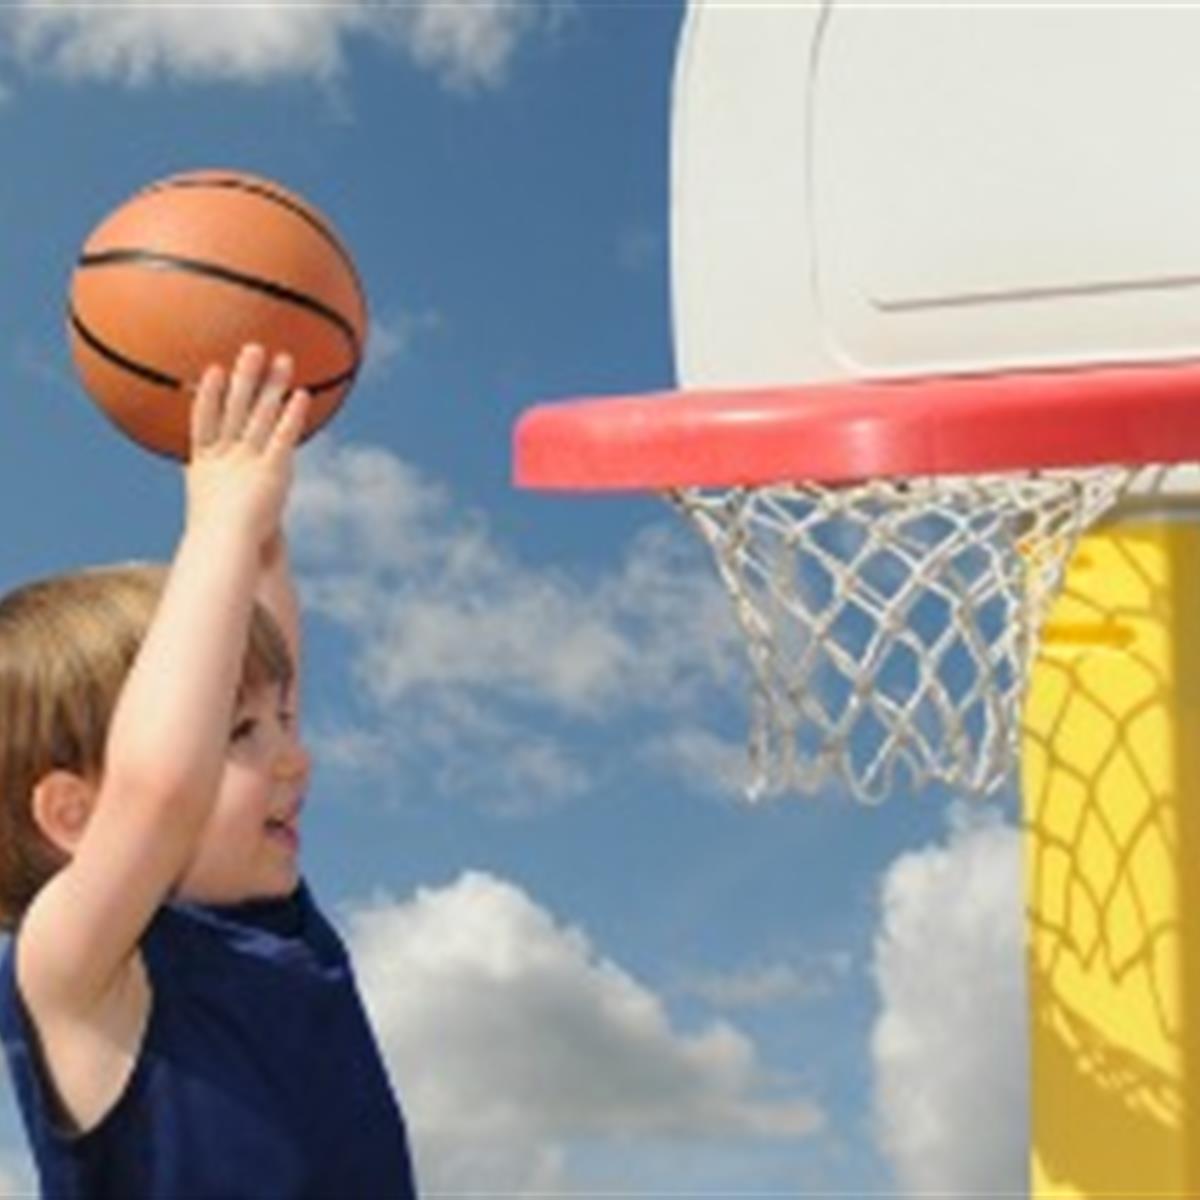 Play Basketball”: 7 Feet Tall Man Shows Off His Height, Mother Is 5 Feet 8  Inches, People Advise Him 